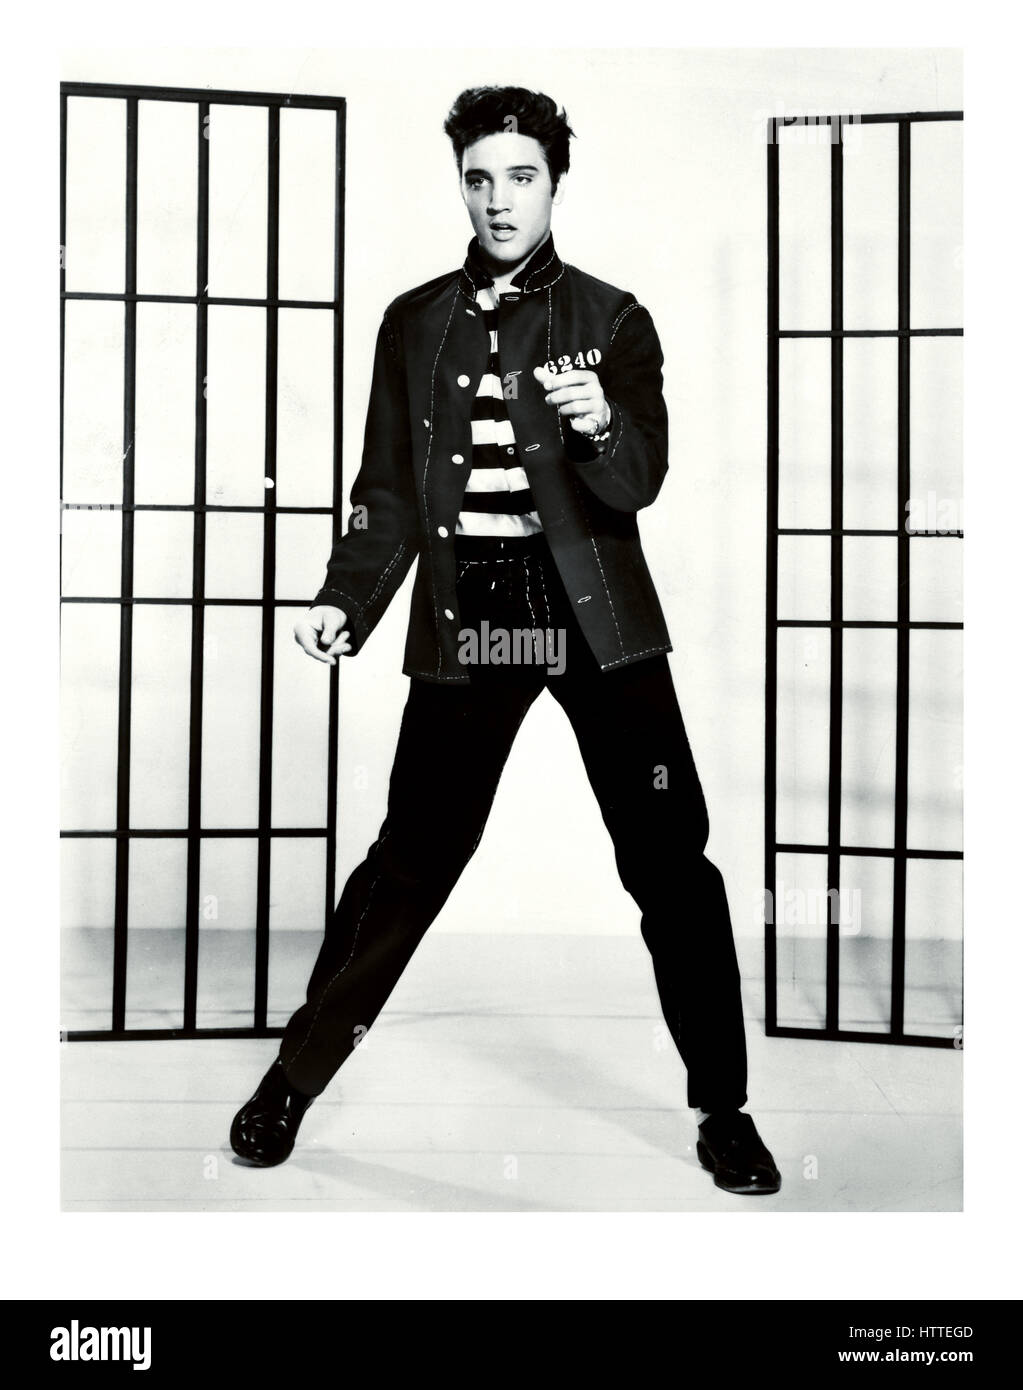 Elvis Presley 1950s film still from Movie & Song 'Jailhouse Rock' 1957 The song lyrics start... 'Warden threw a party in the County Jail' Stock Photo